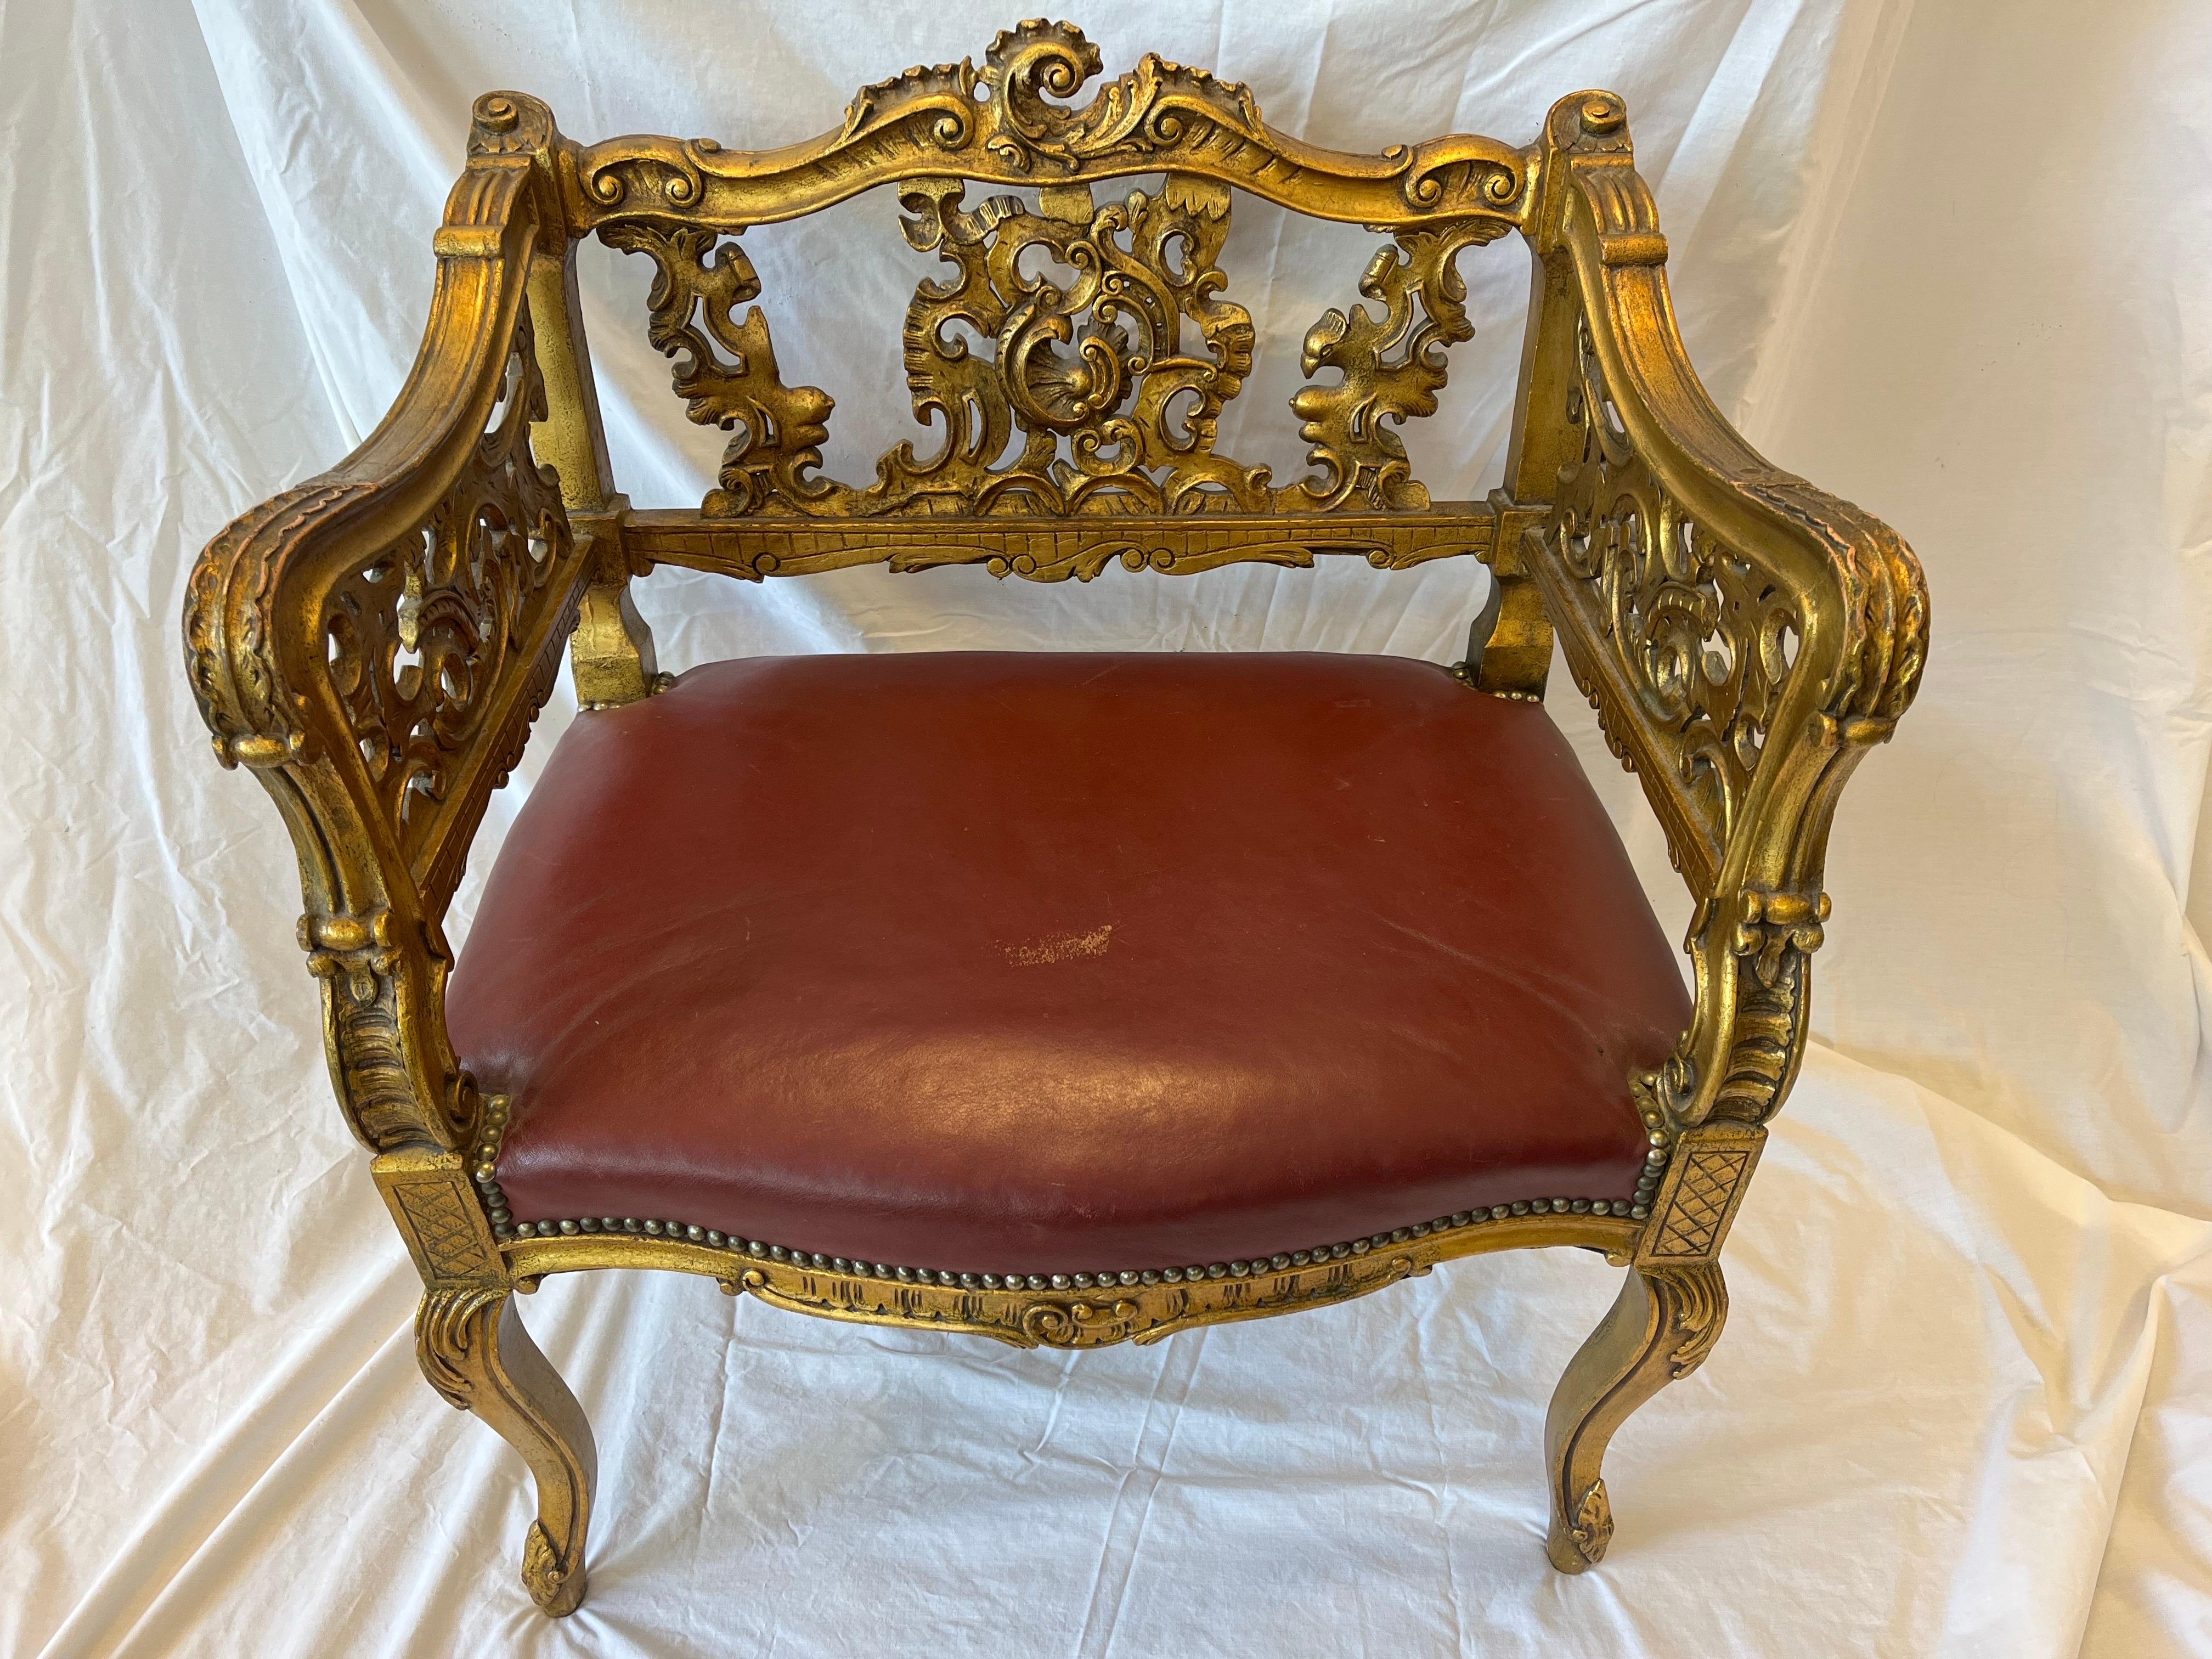 An antique, late 19th century carved and giltwood stylized armchair. The ornate Louis or Rococo style carving features ornate, scrolling designs. Cabriole legs, stylized floral motifs and cross hatching all play a part in the overall aesthetic. With